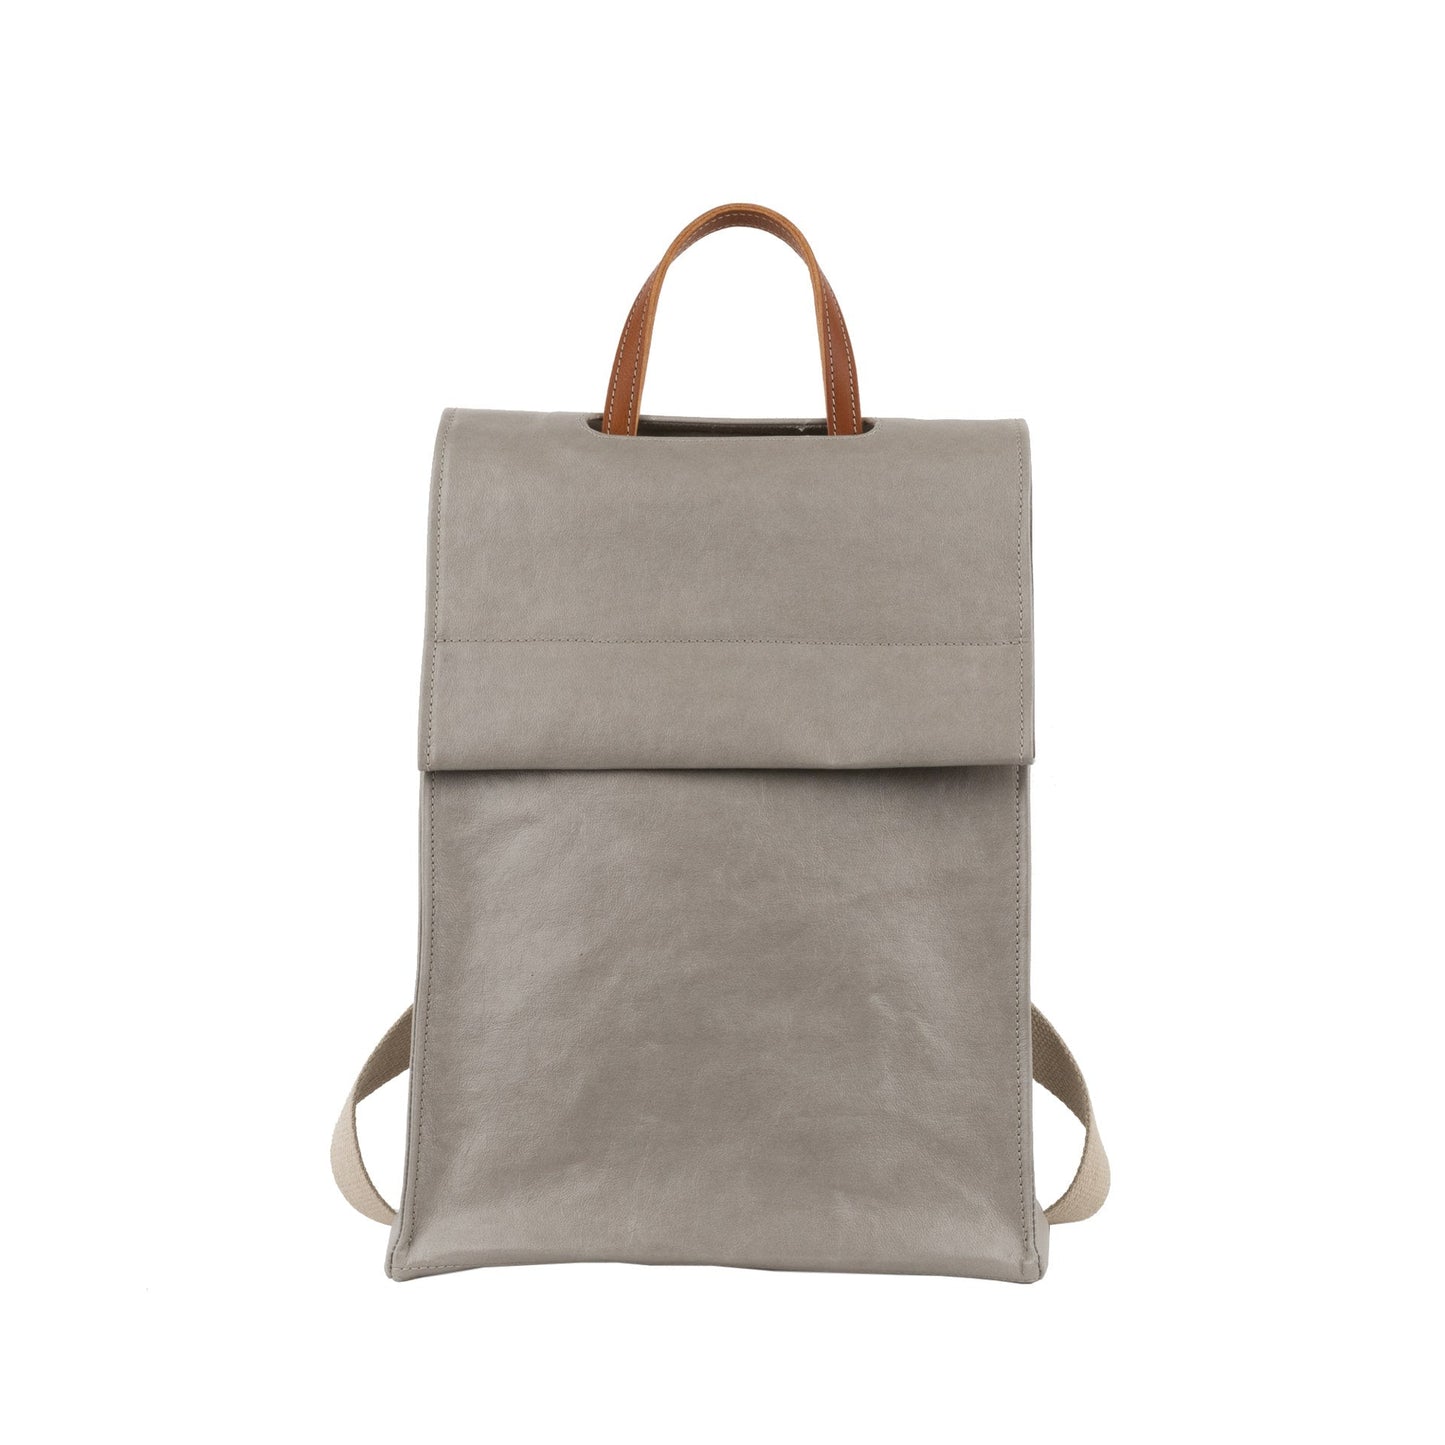 A tall rectangular square-edged washable paper backpack with a front flap and a brown top handle is shown in grey, with white stitching.